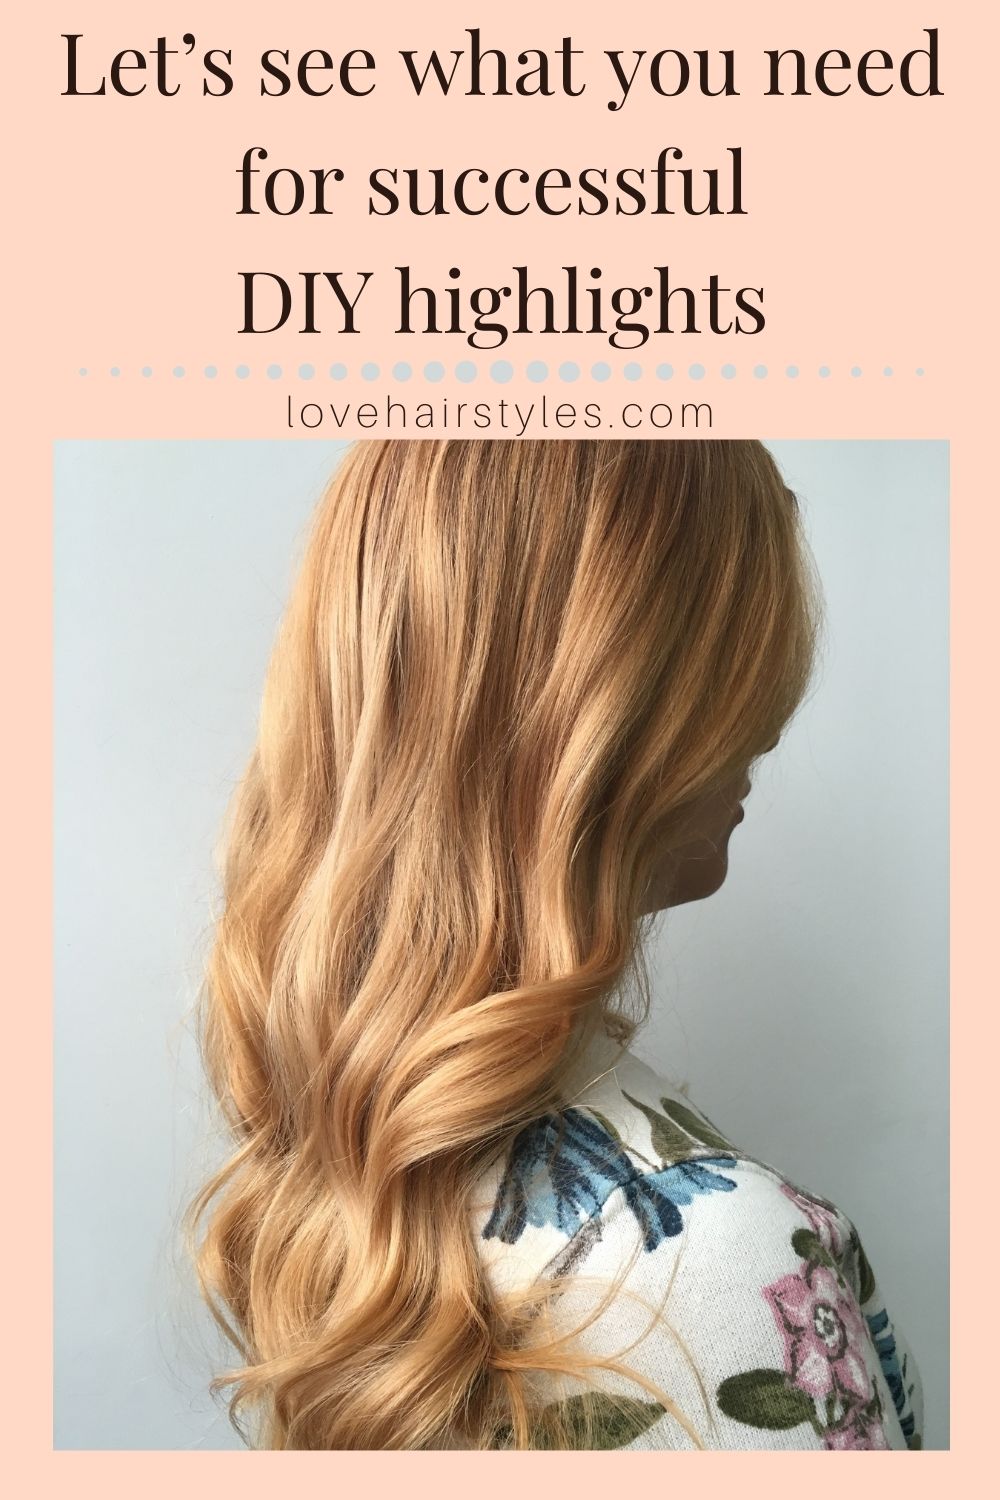 Let’s see what you need for successful DIY highlights.